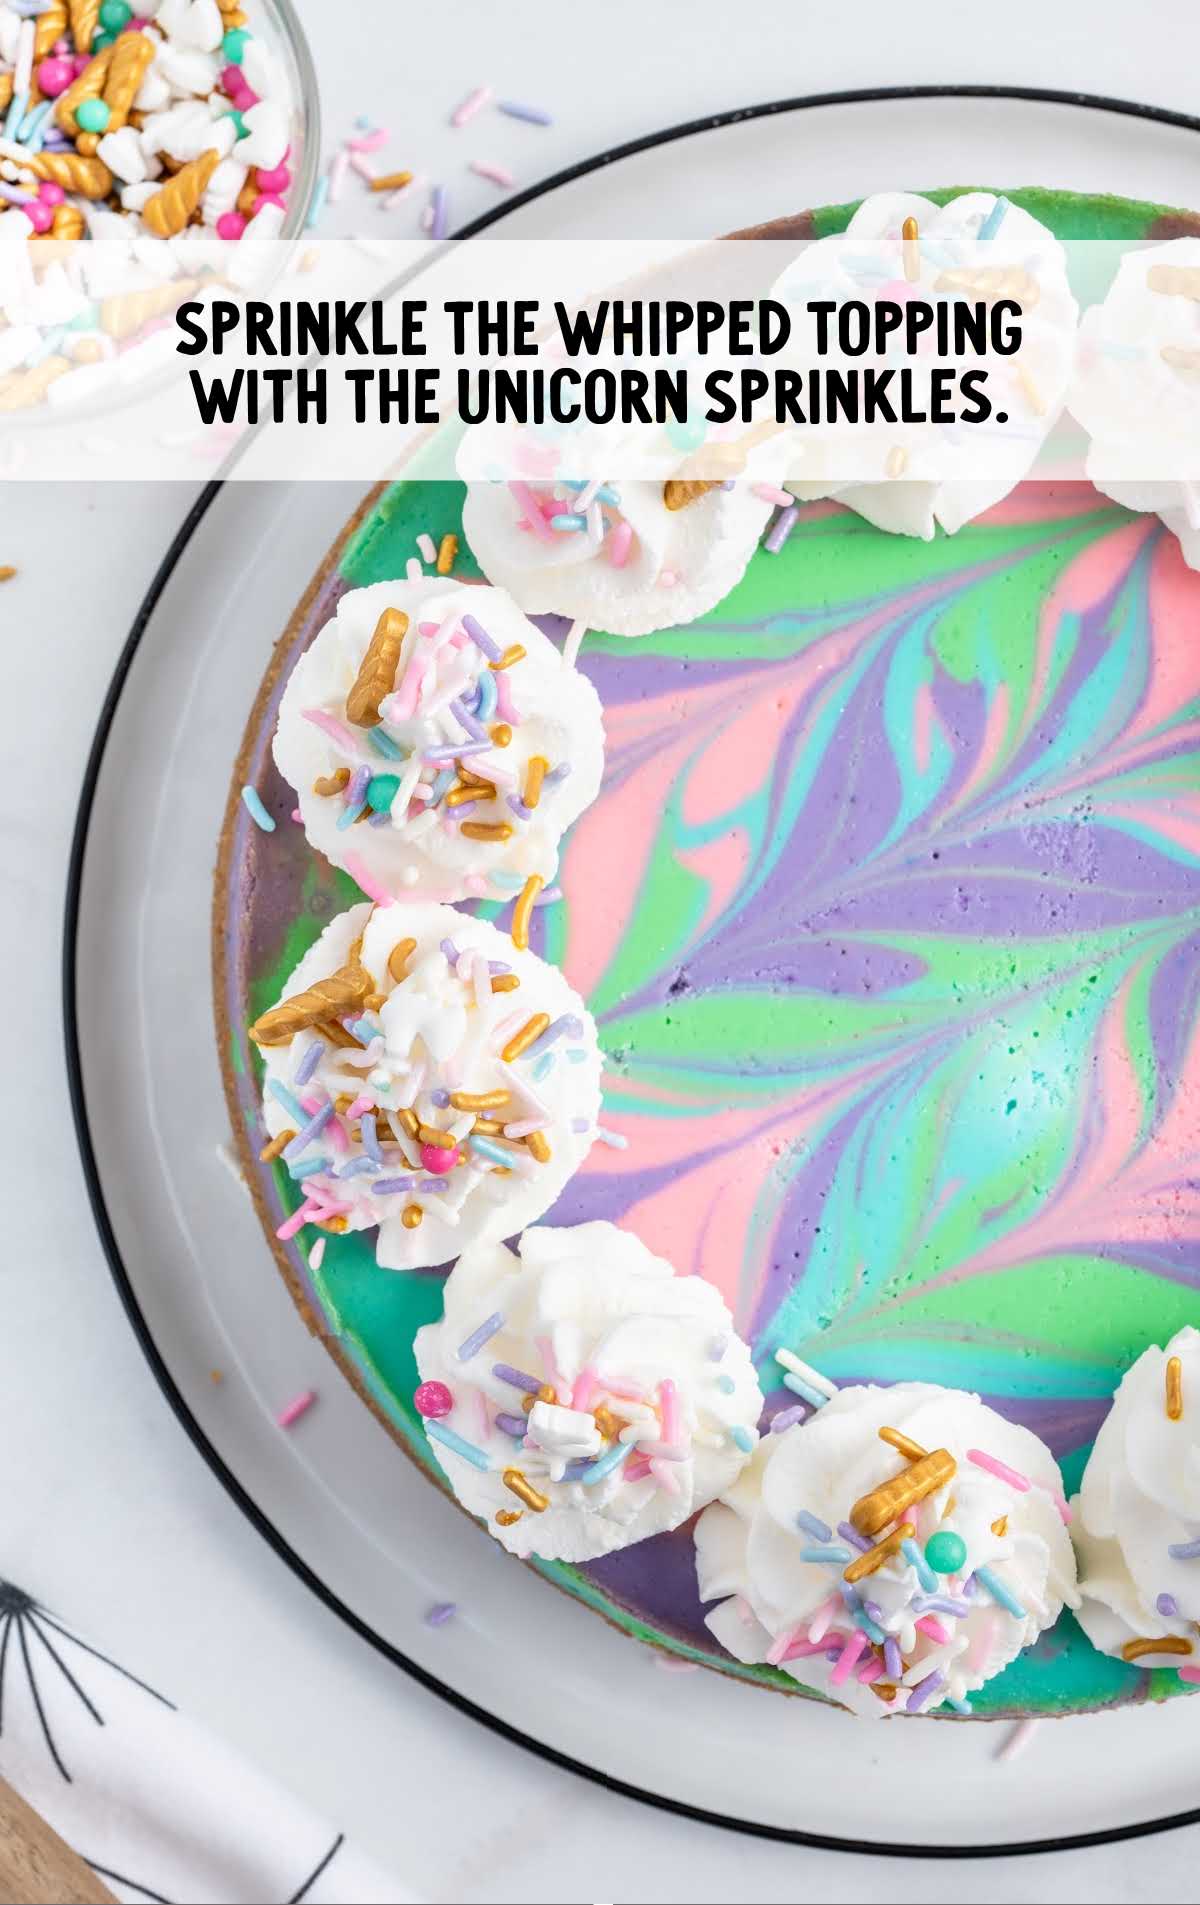 whipped topping and unicorn sprinkles sprinkled